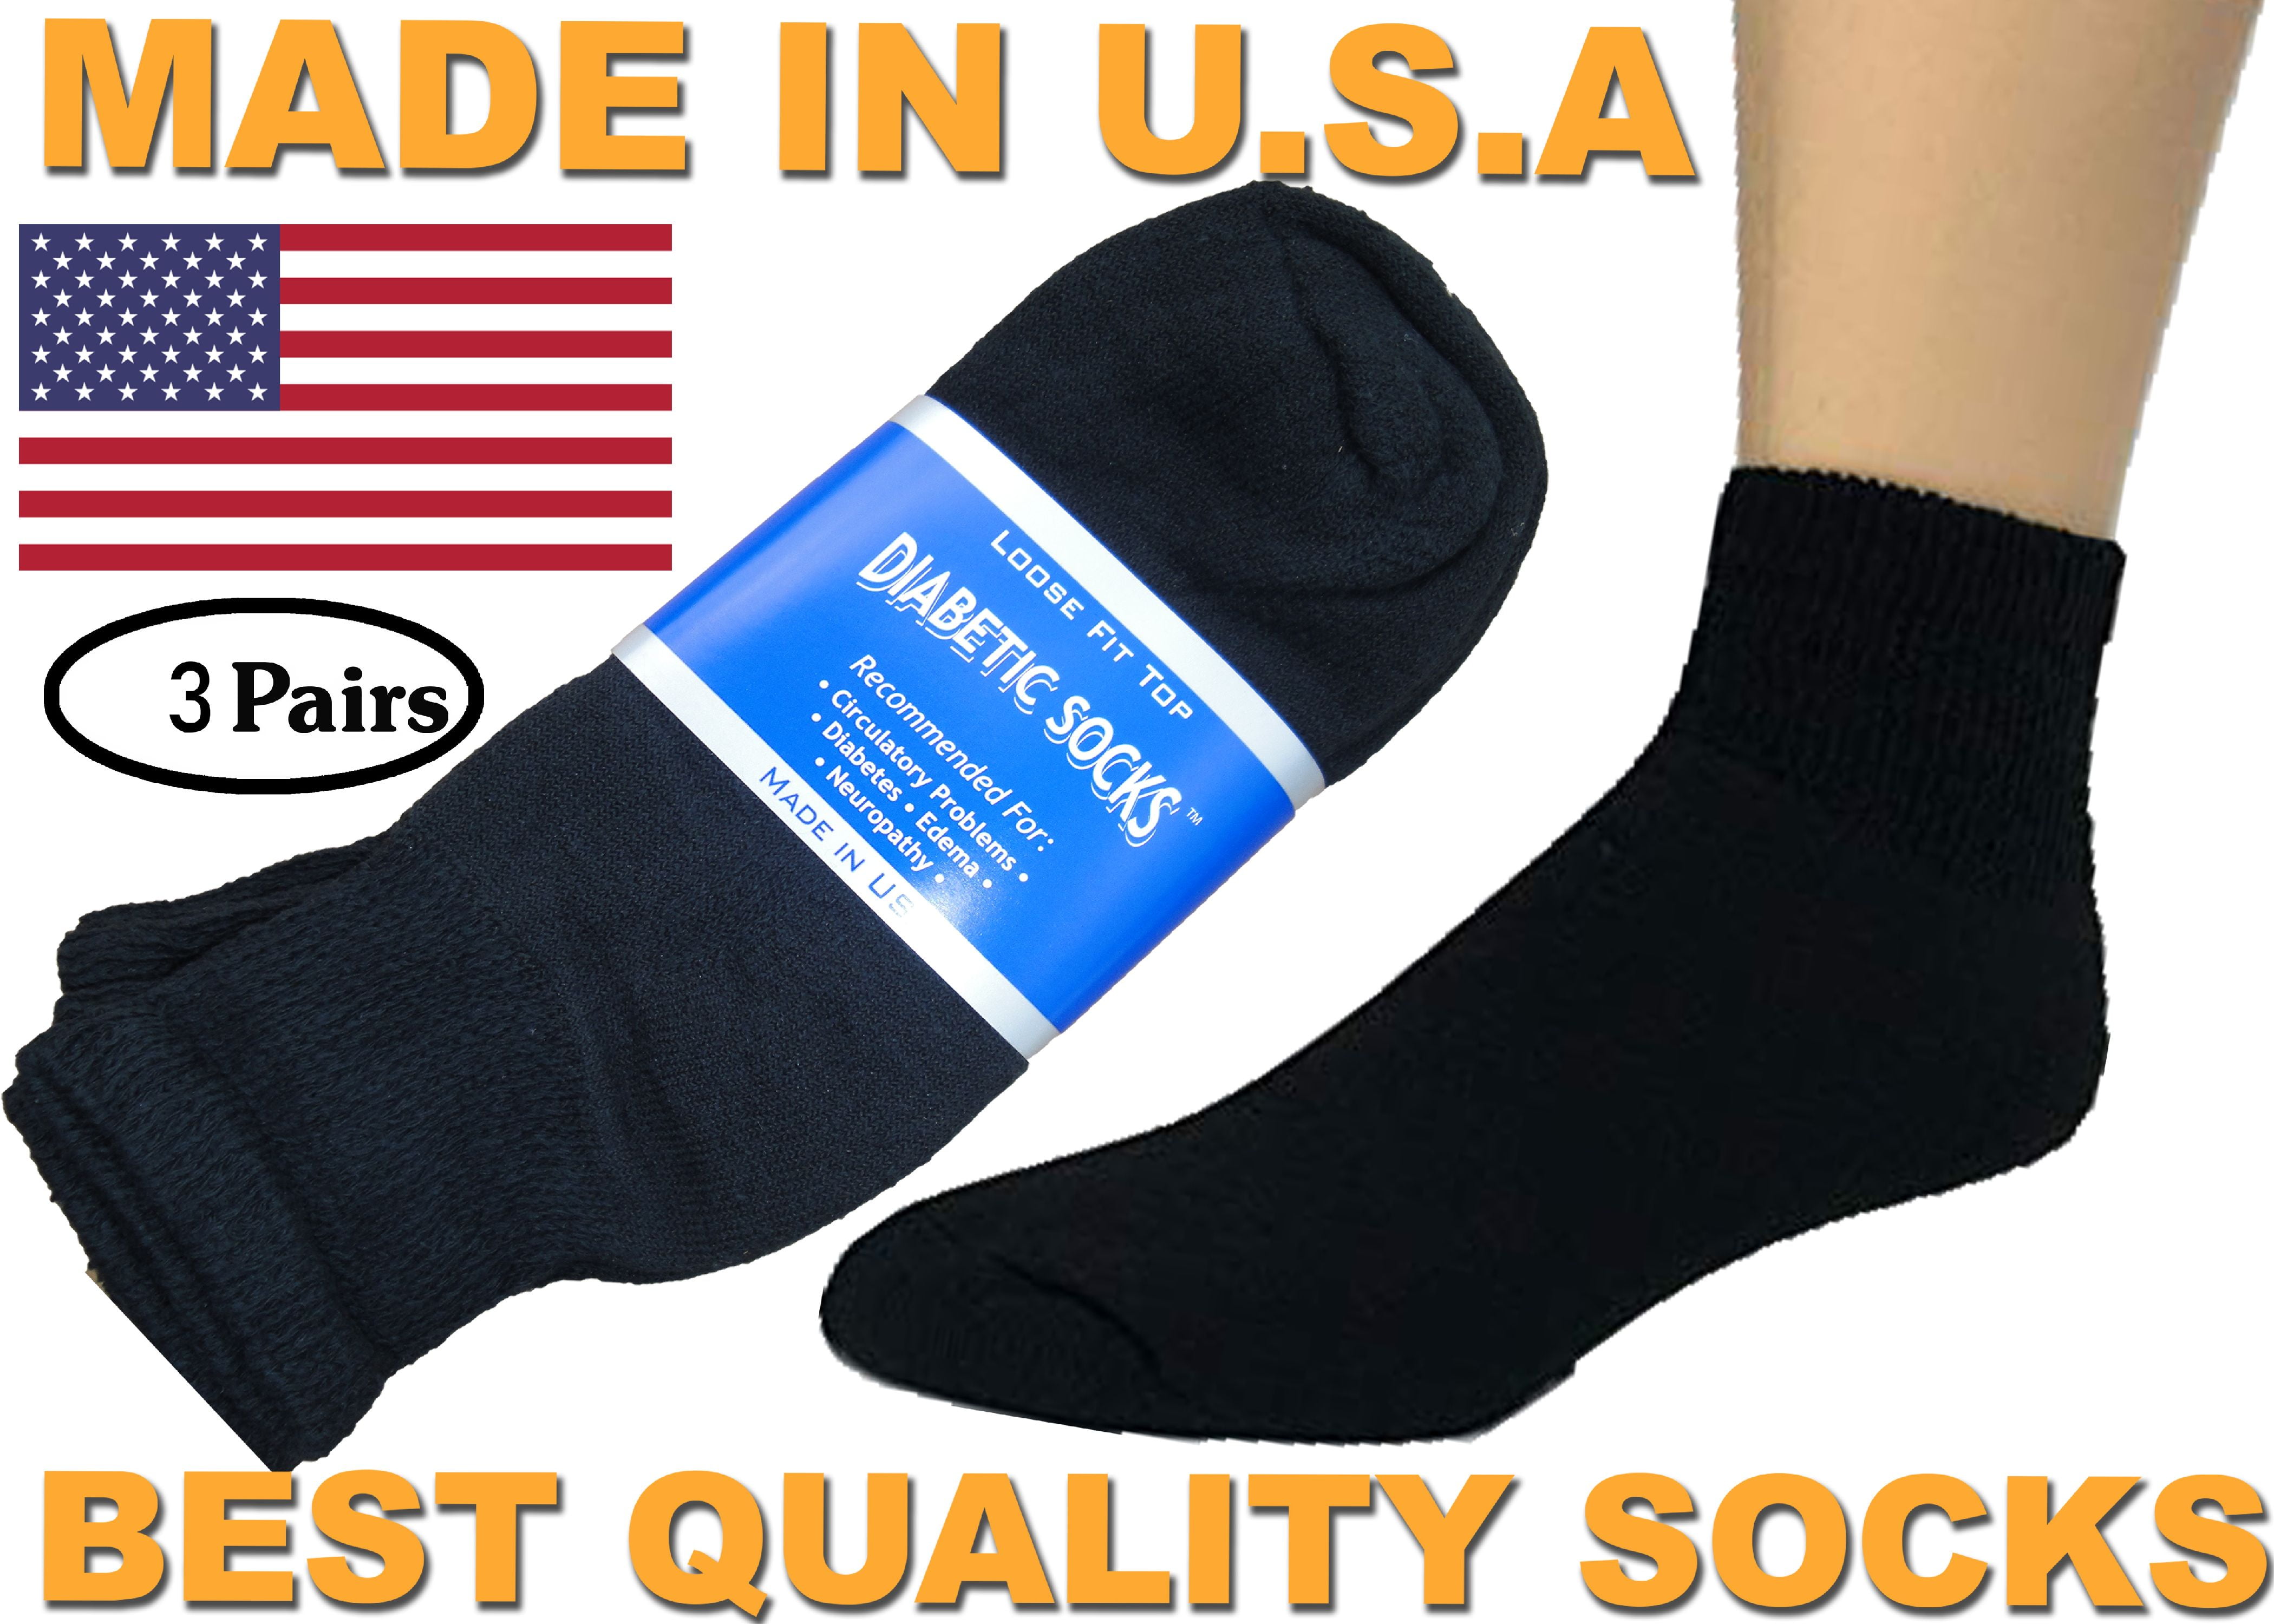 Best Quality 9 Pairs of Mens White Diabetic Ankle Socks 10-13 size MADE IN USA 